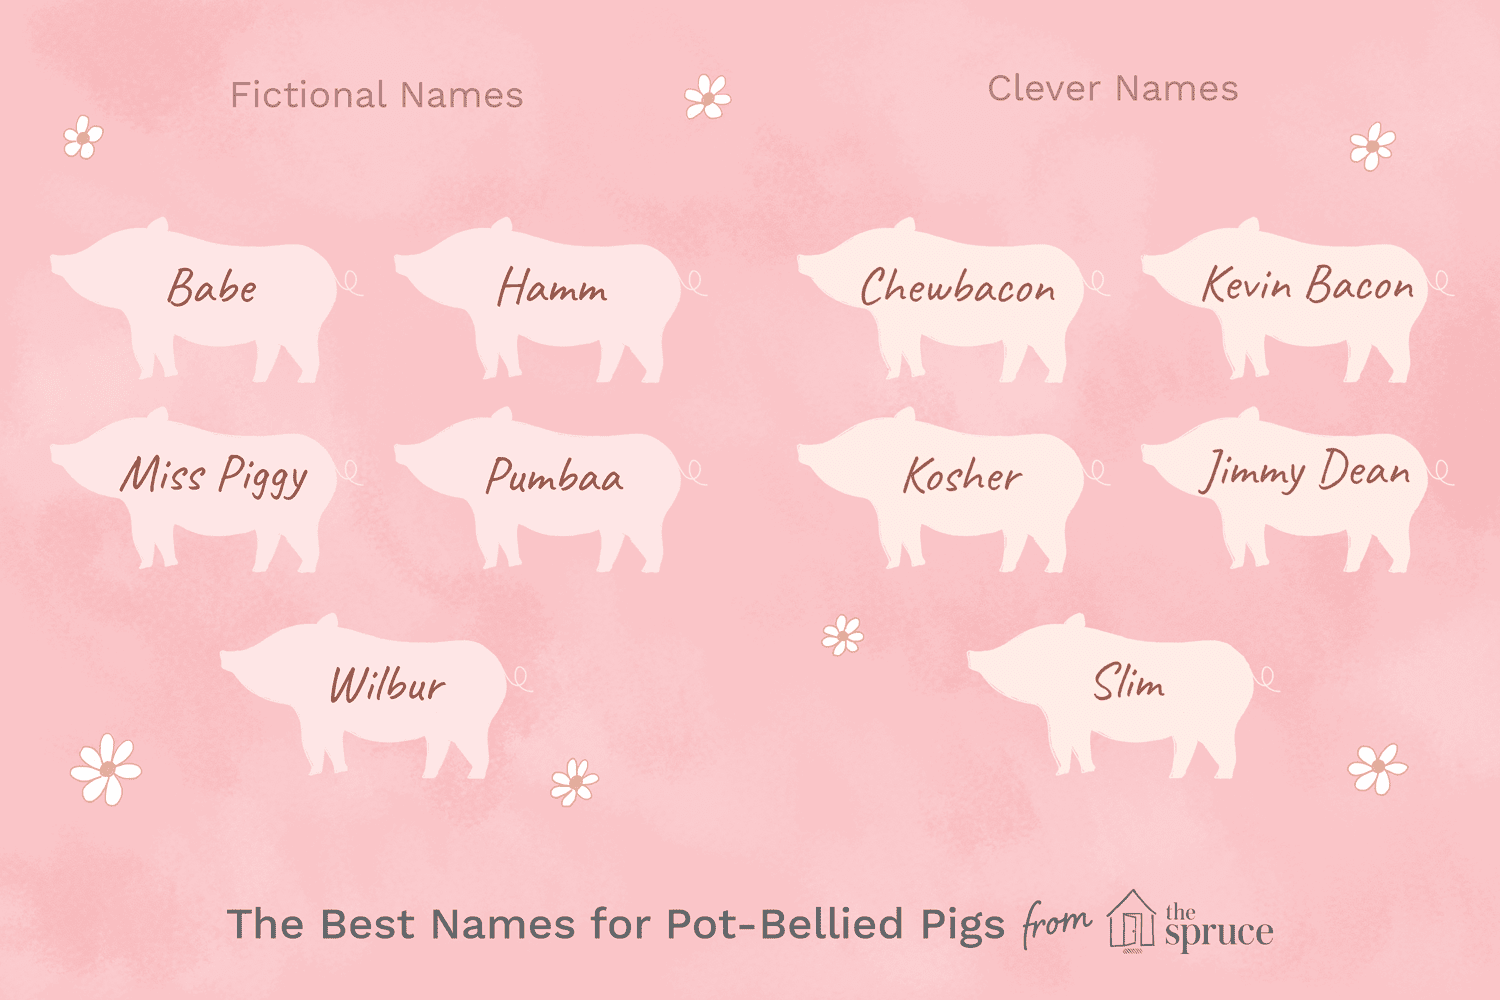 What are the best names for pigs?